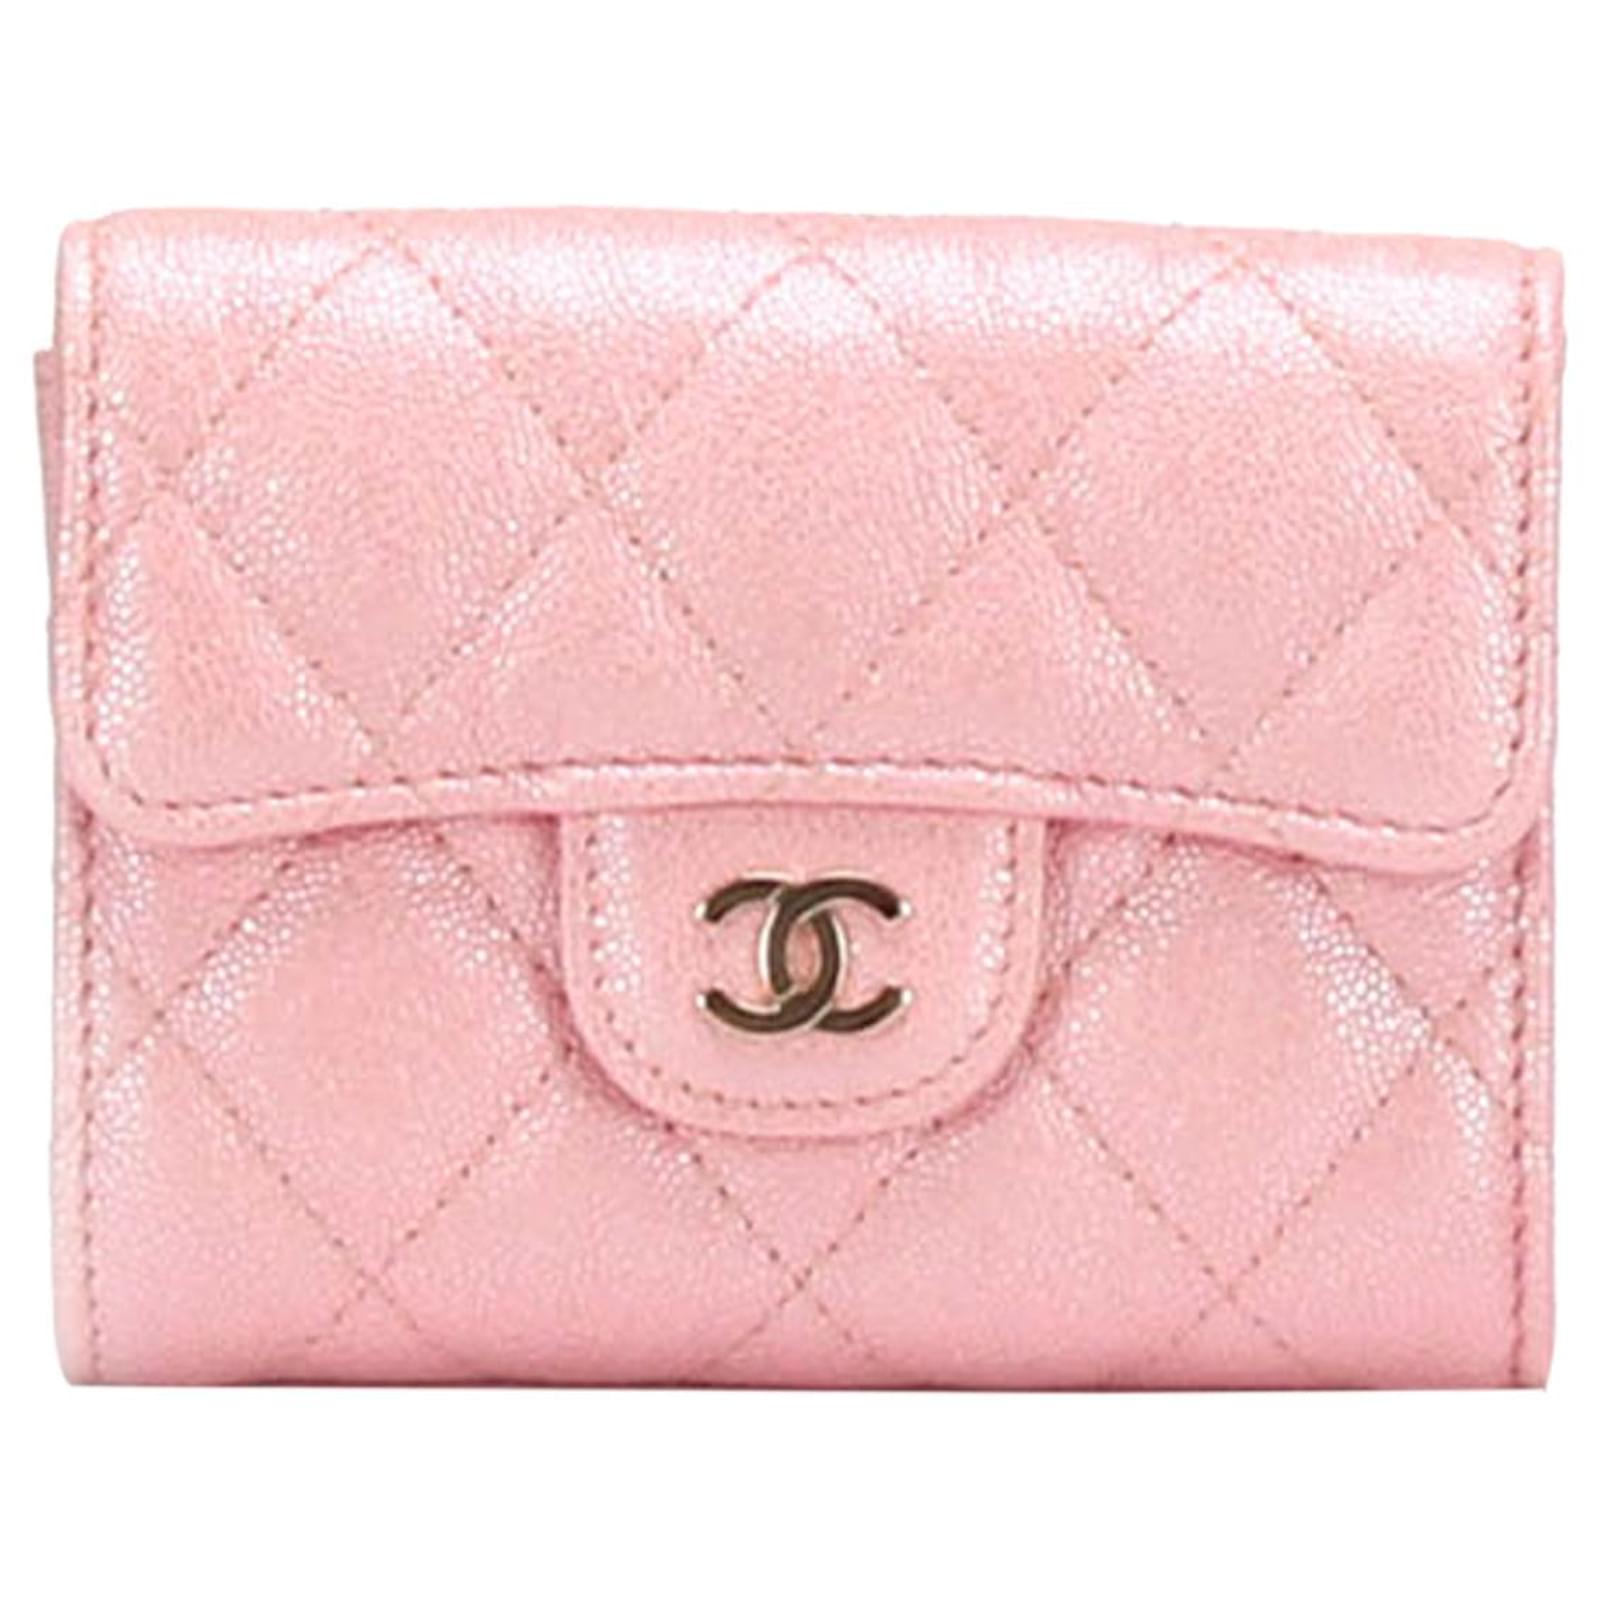 Chanel Pink CC Caviar Leather Wallet